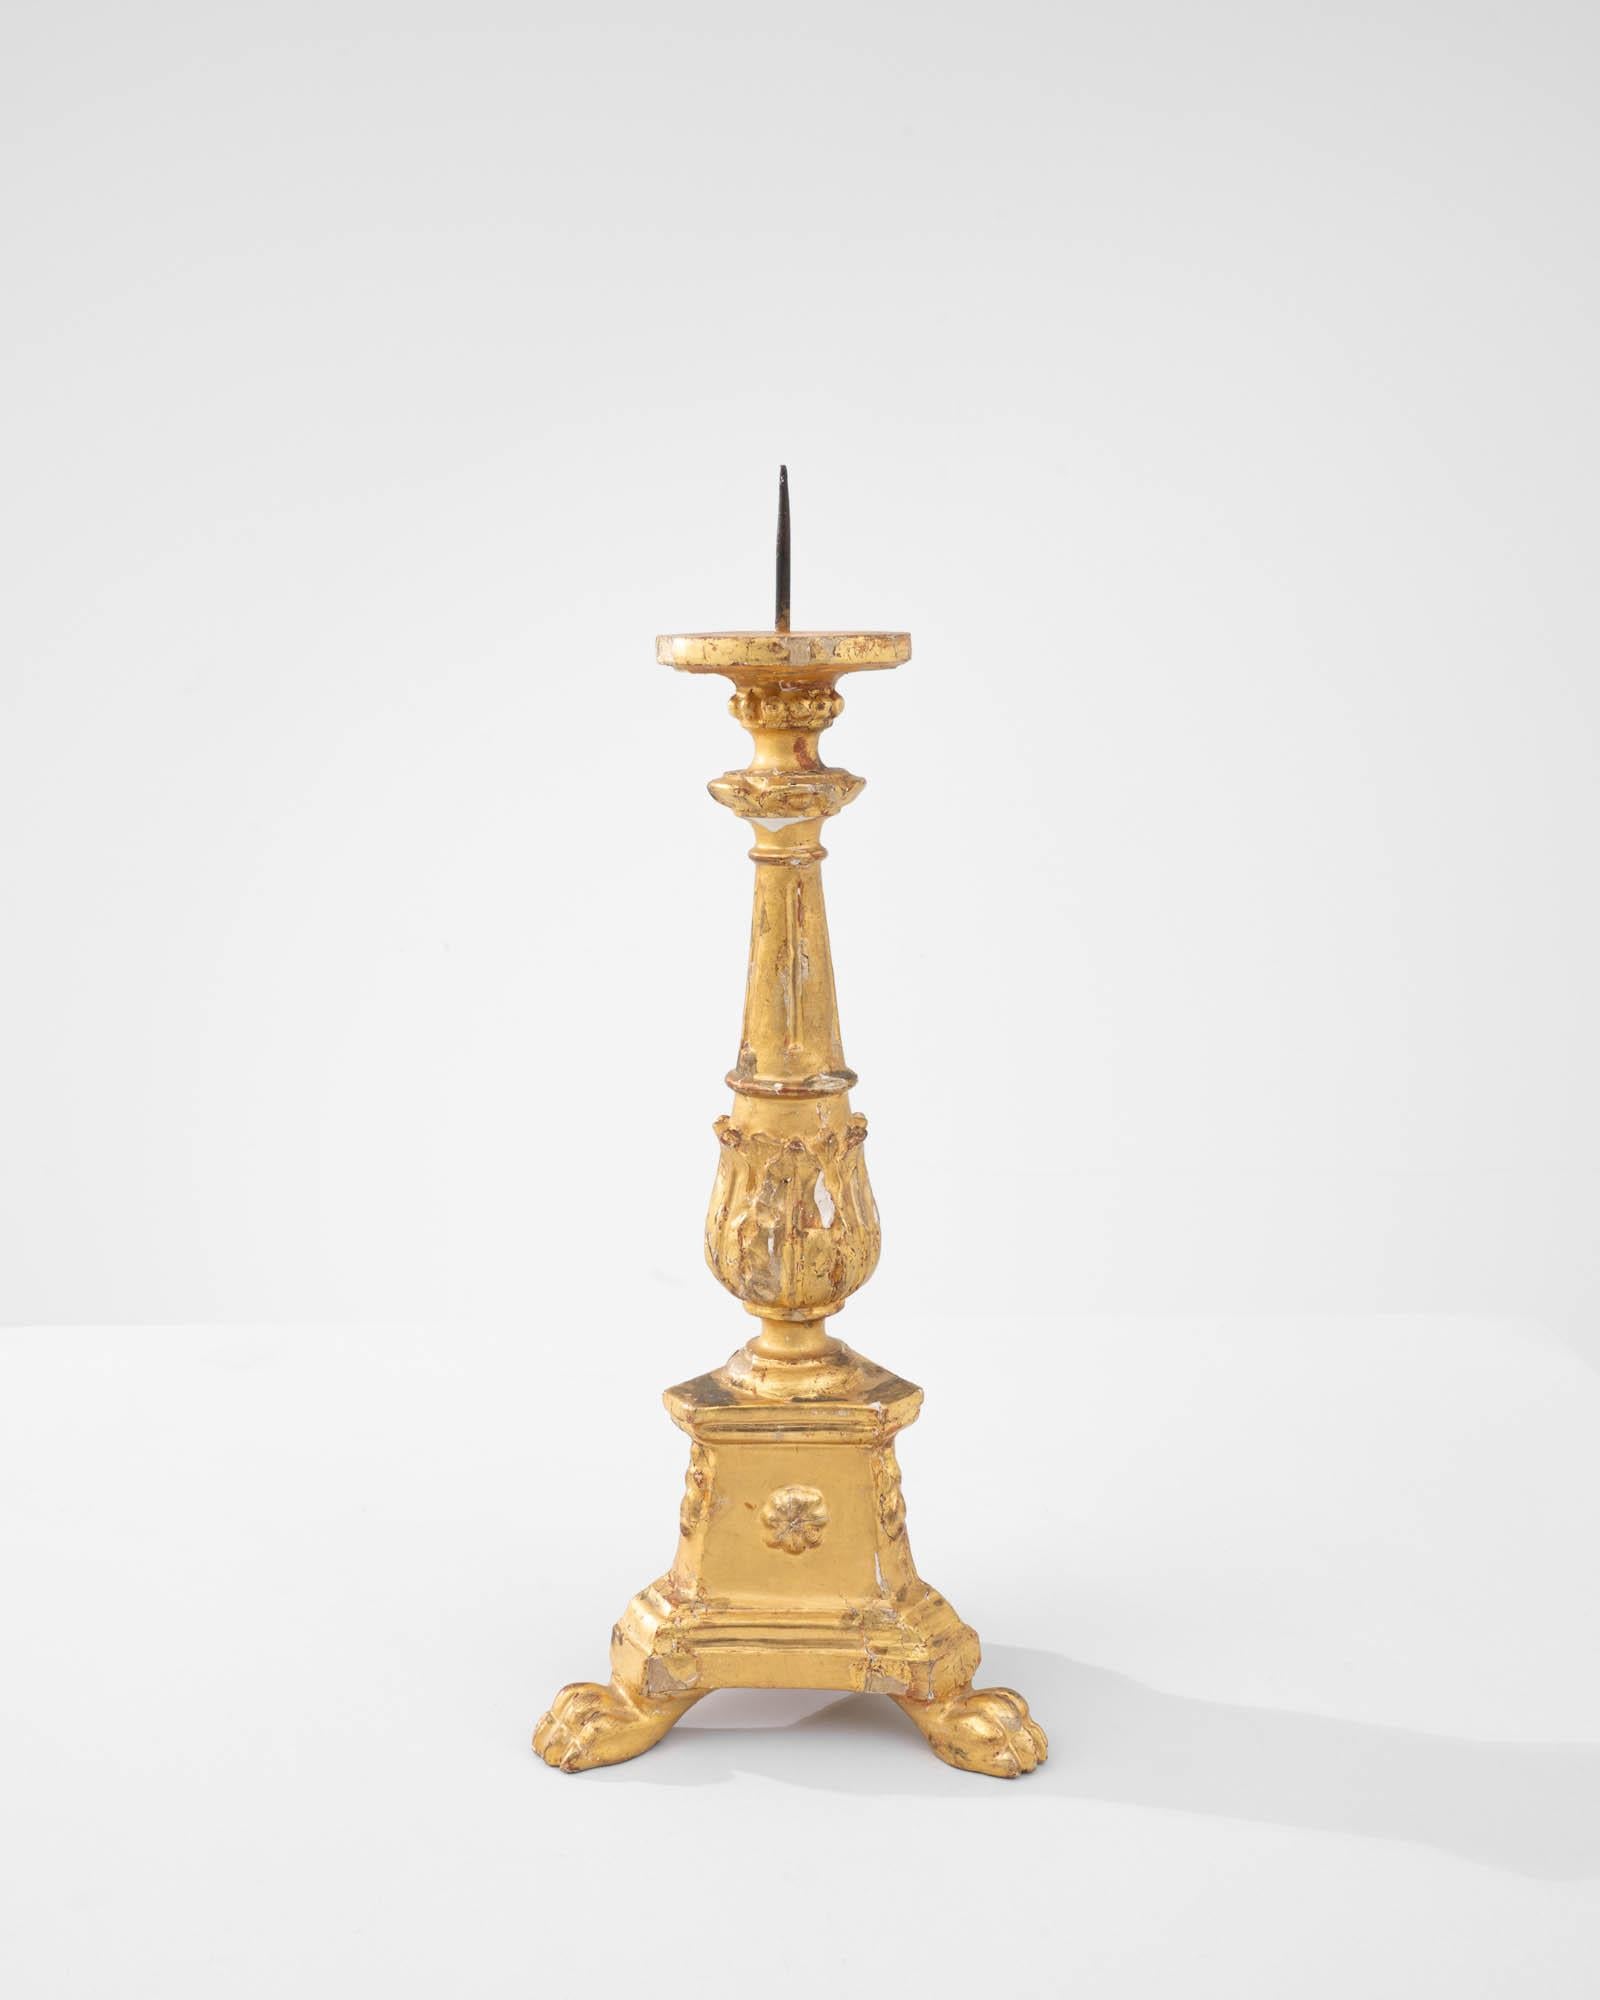 This wooden candle holder was made in France. An ancient tradition of necessity and pleasure: providing light, emitting heat, pleasant fragrances, and keeping time– the little flame of the candle captures it all. This elegant giltwood candlestick